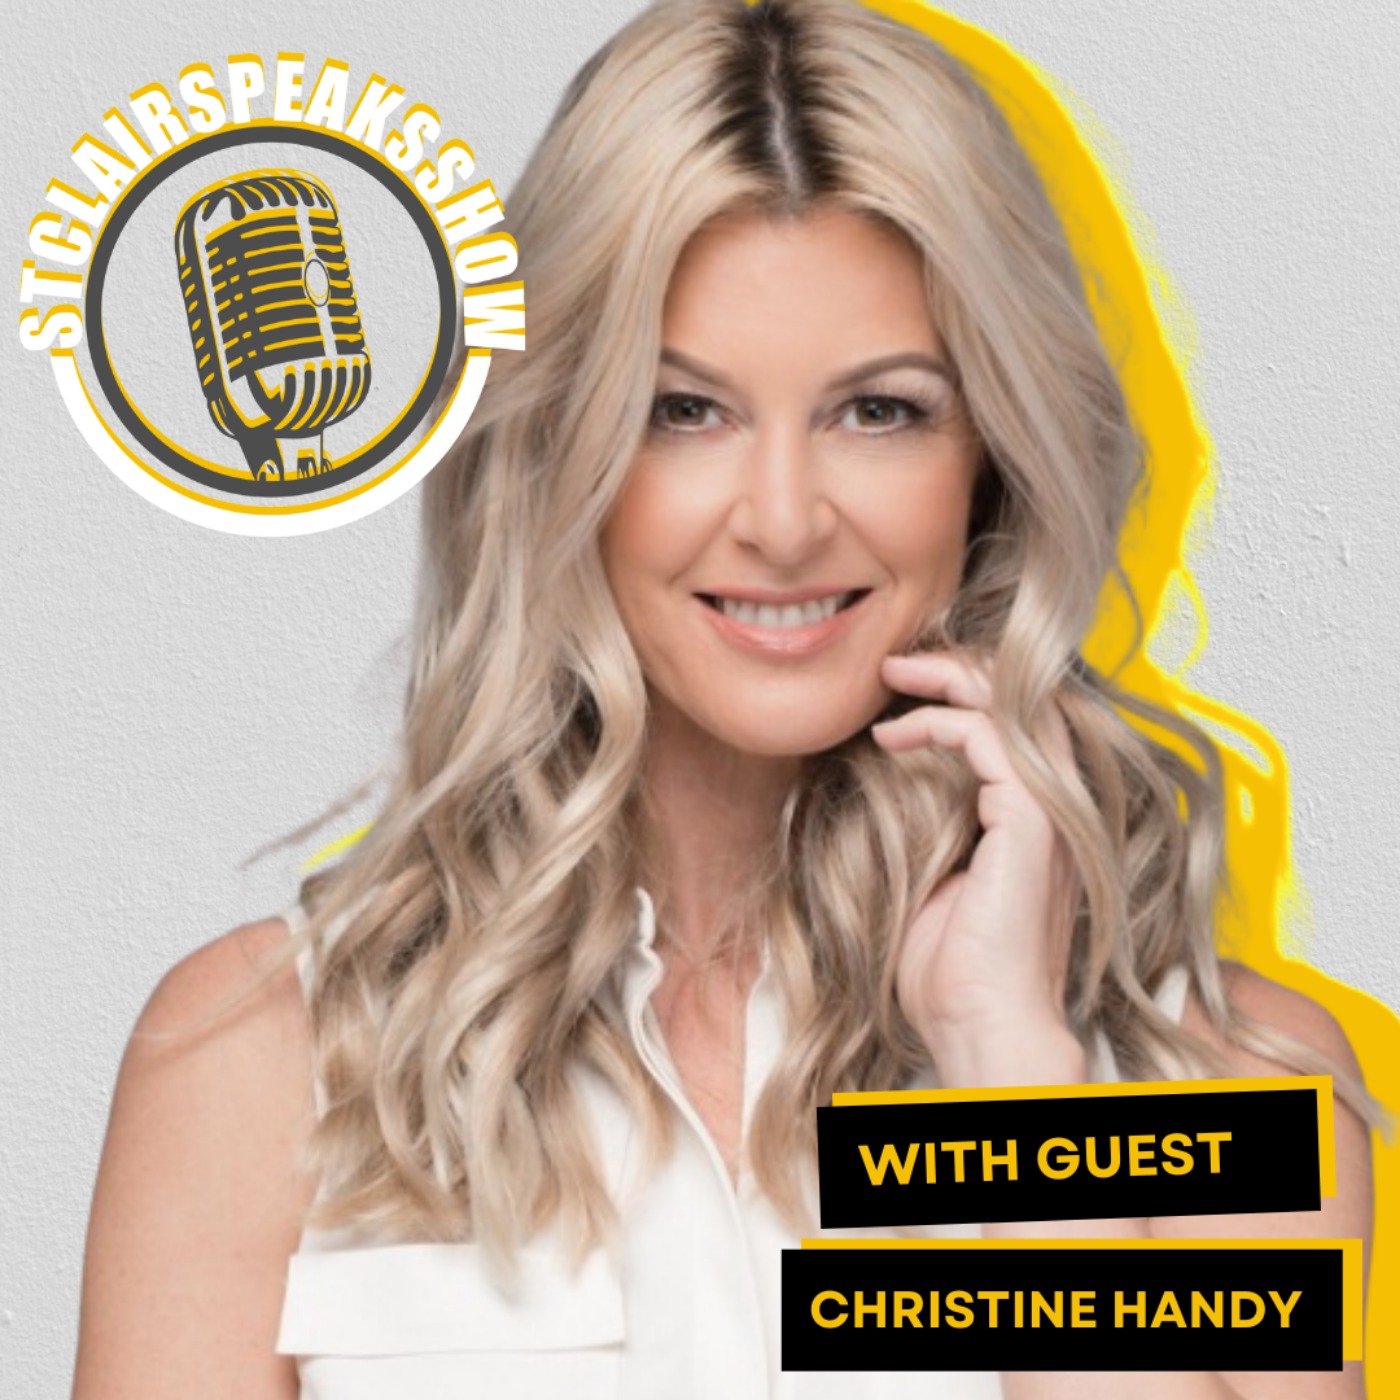 The StclairSpeaksShow Podcast with Christine Handy - Finding Your Purpose, Community & Support System. Image